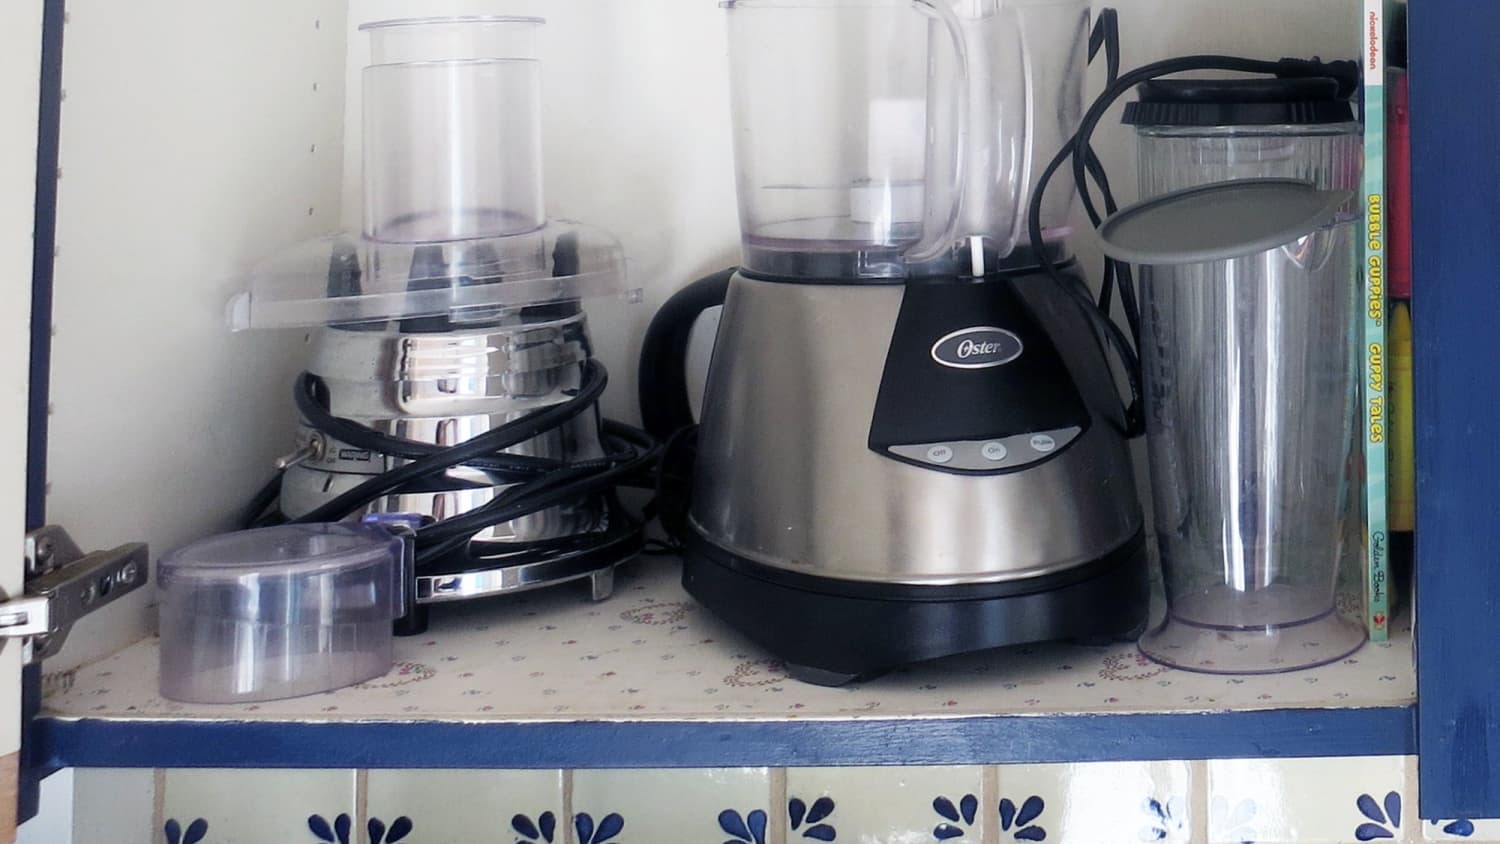 Do You Have Any Tips for Storing Food Processor Blades?